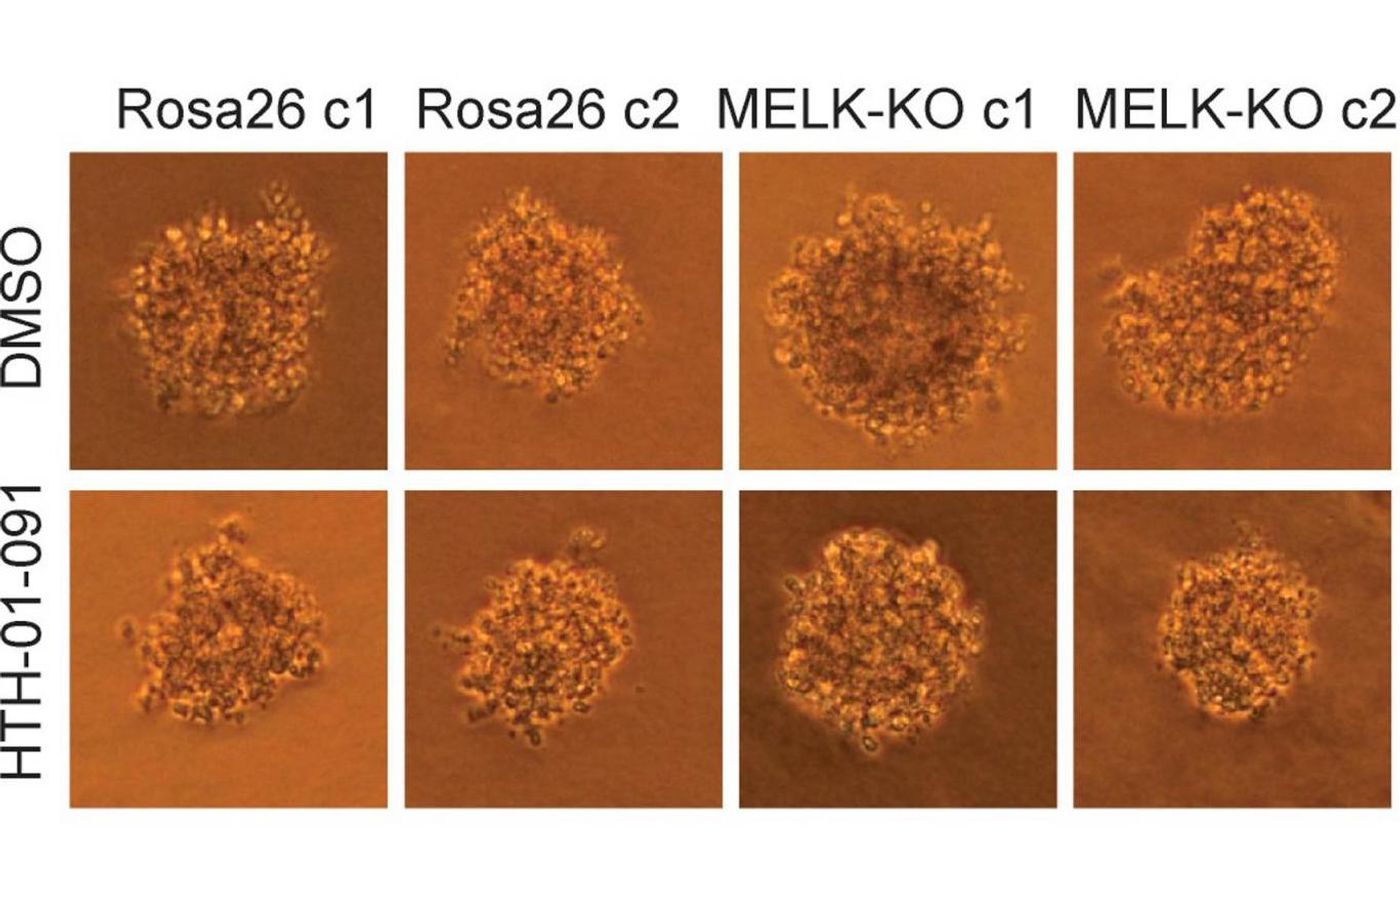 The growth of human colon cancer cells (raised in culture) is unaffected by the MELK gene. Top row: untreated cells; bottom row: cells treated with a MELK inhibitor drug. Left two columns, control cells; right two columns, cells in which MELK gene has been knocked out. CSHL researchers conclude that MELK is not involved in cancer proliferation.  / Credit: Sheltzer Lab, CSHL